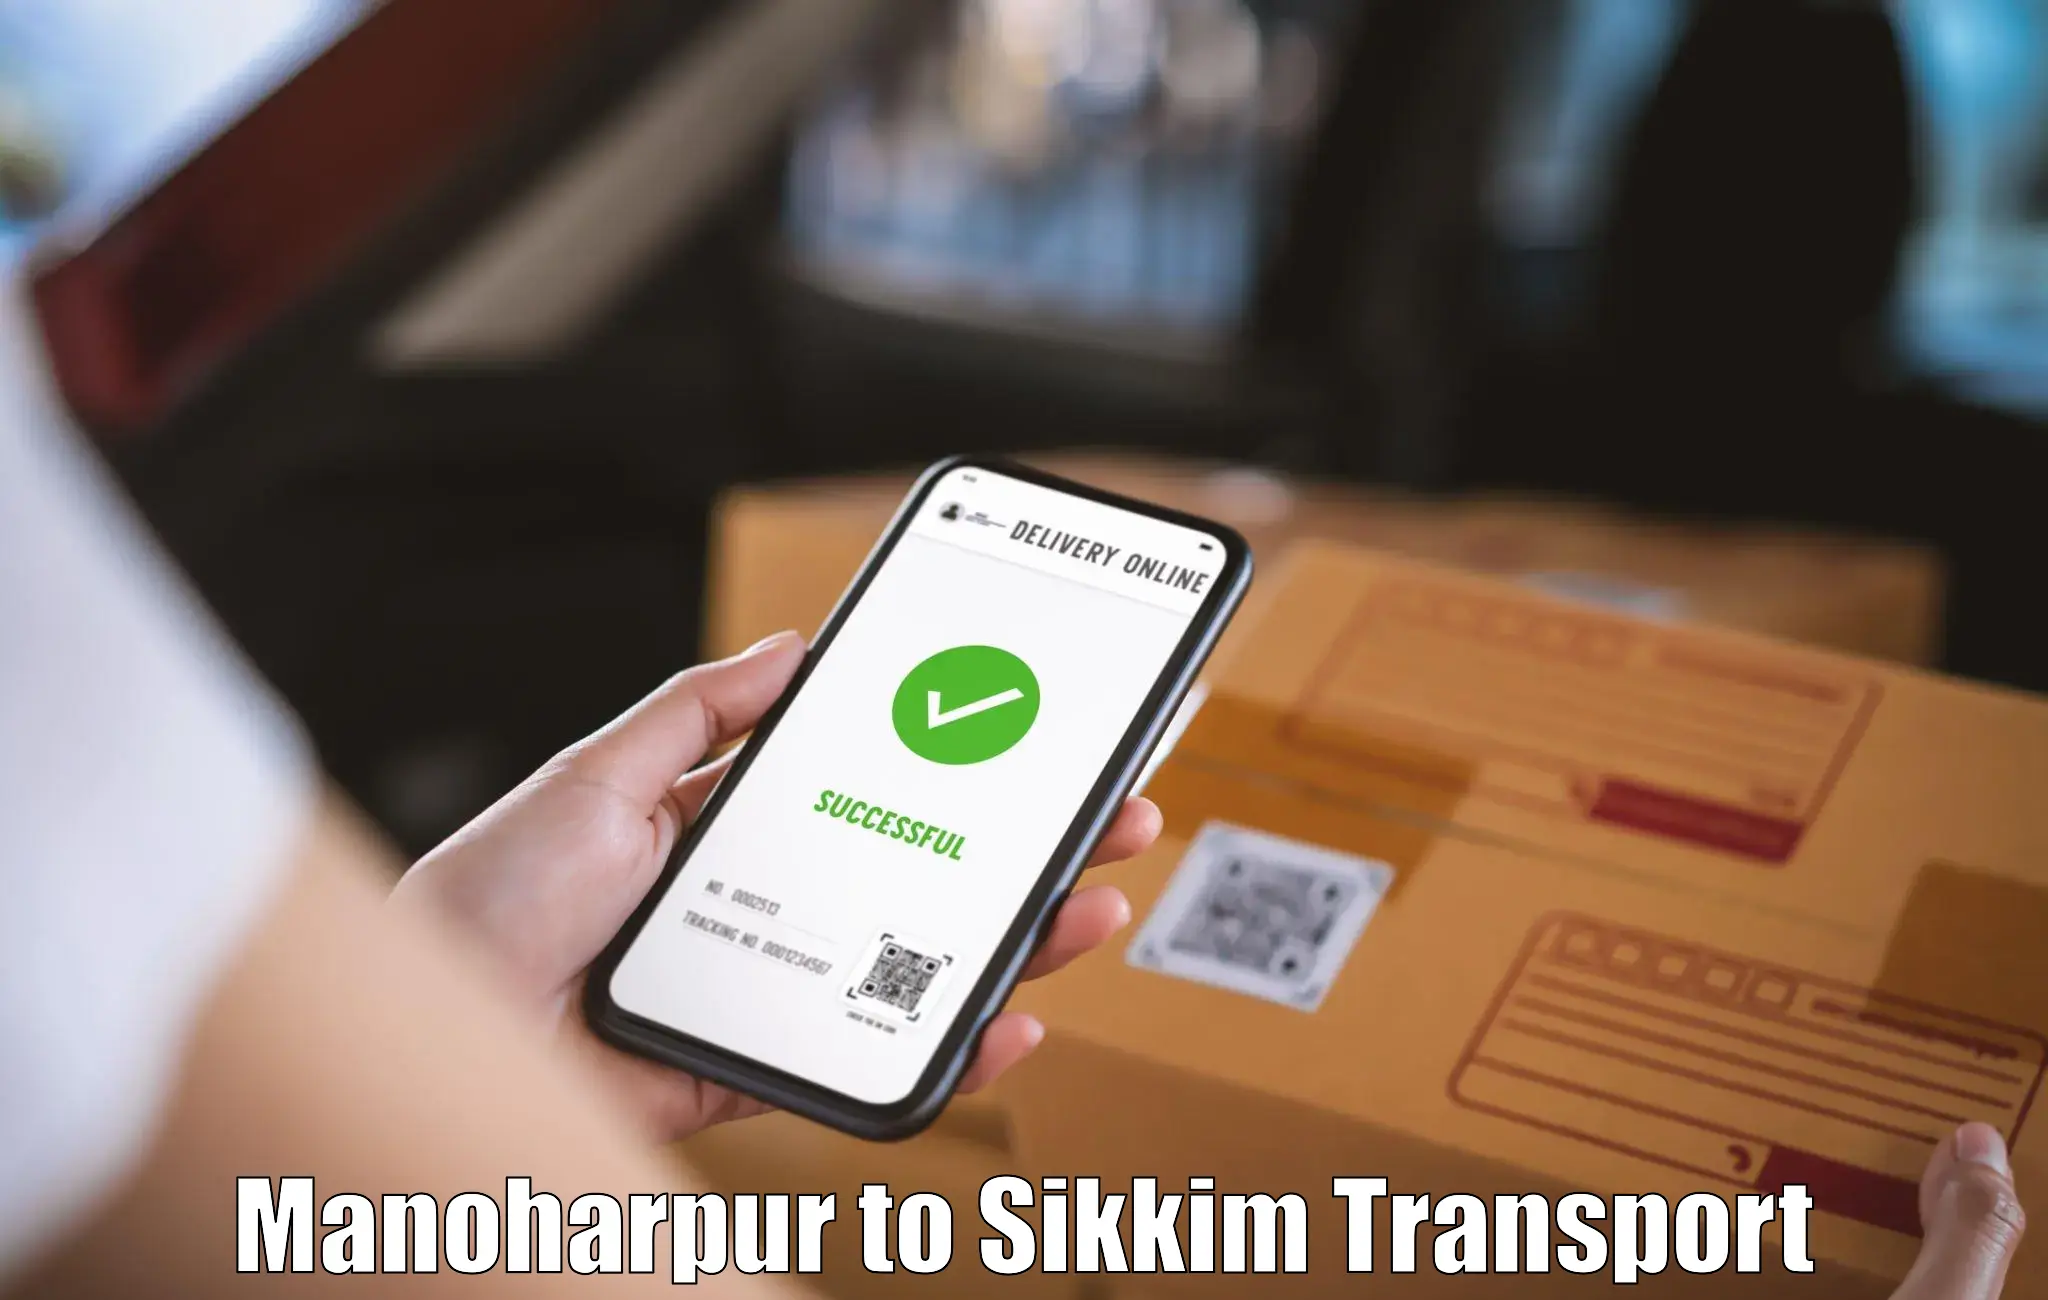 Nationwide transport services Manoharpur to East Sikkim